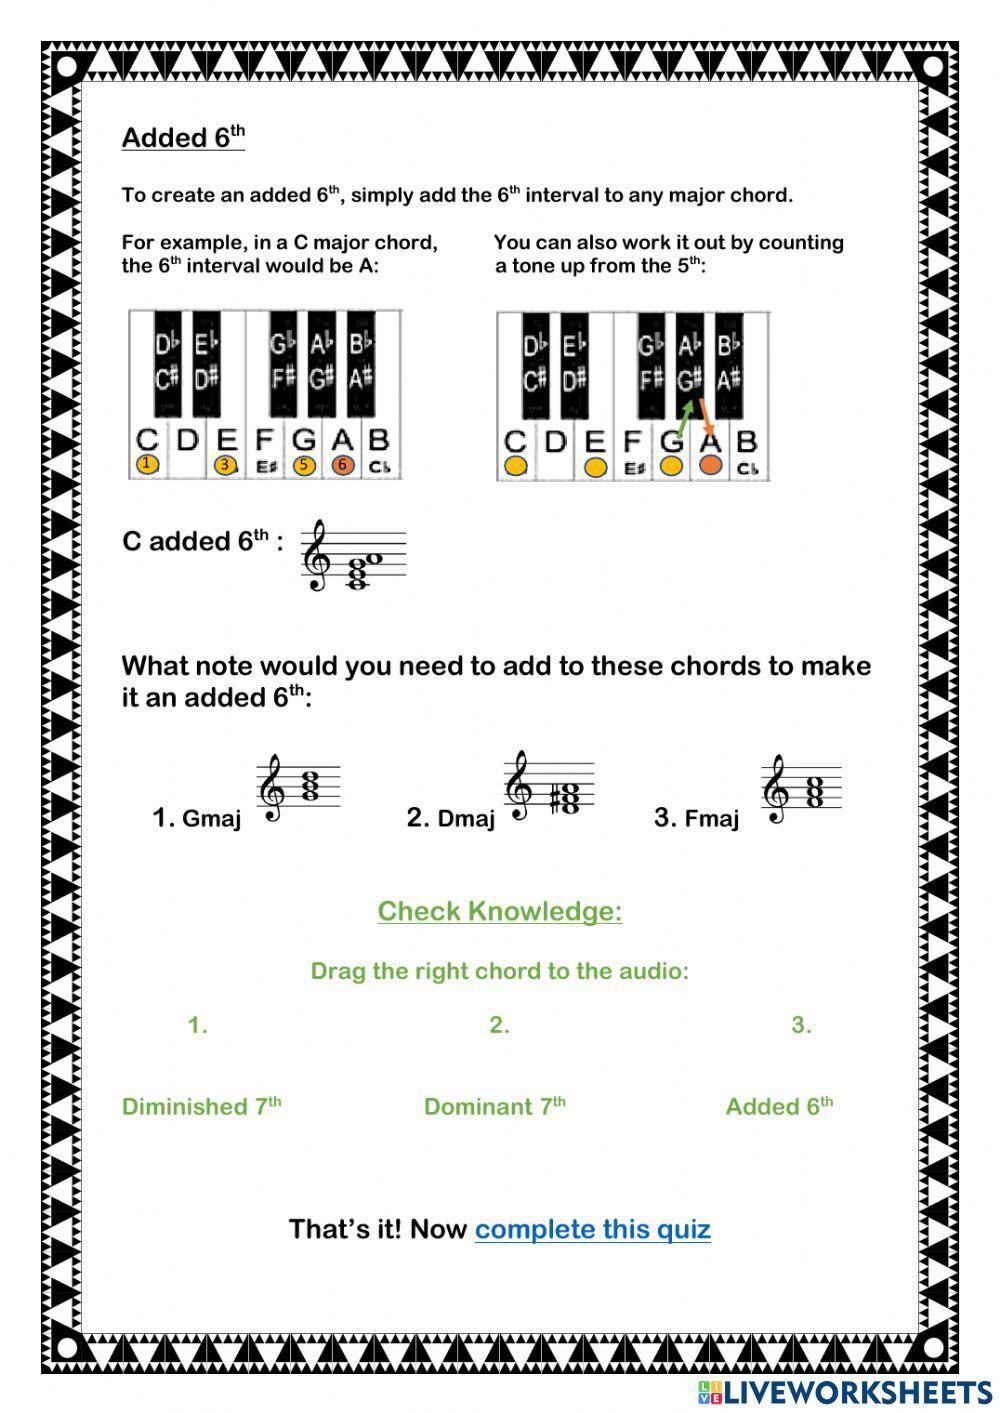 Higher Special Chords 2 of 2